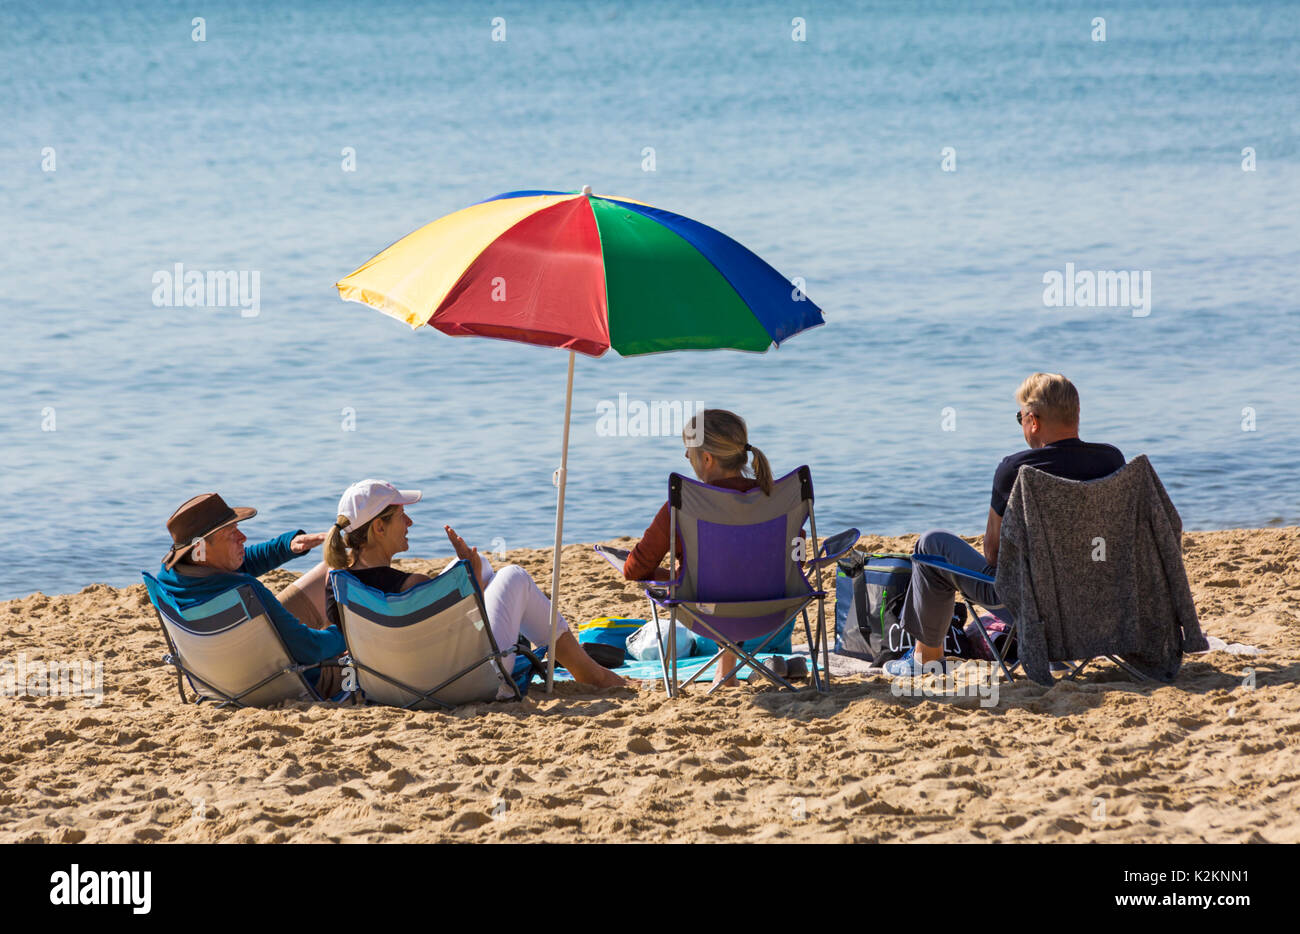 Bournemouth, Dorset, UK. 1st Sep, 2017. UK weather: lovely warm sunny day at Bournemouth beach on the South Coast. Beachgoers sit in chairs under colourful parasol.  Credit: Carolyn Jenkins/Alamy Live News Stock Photo